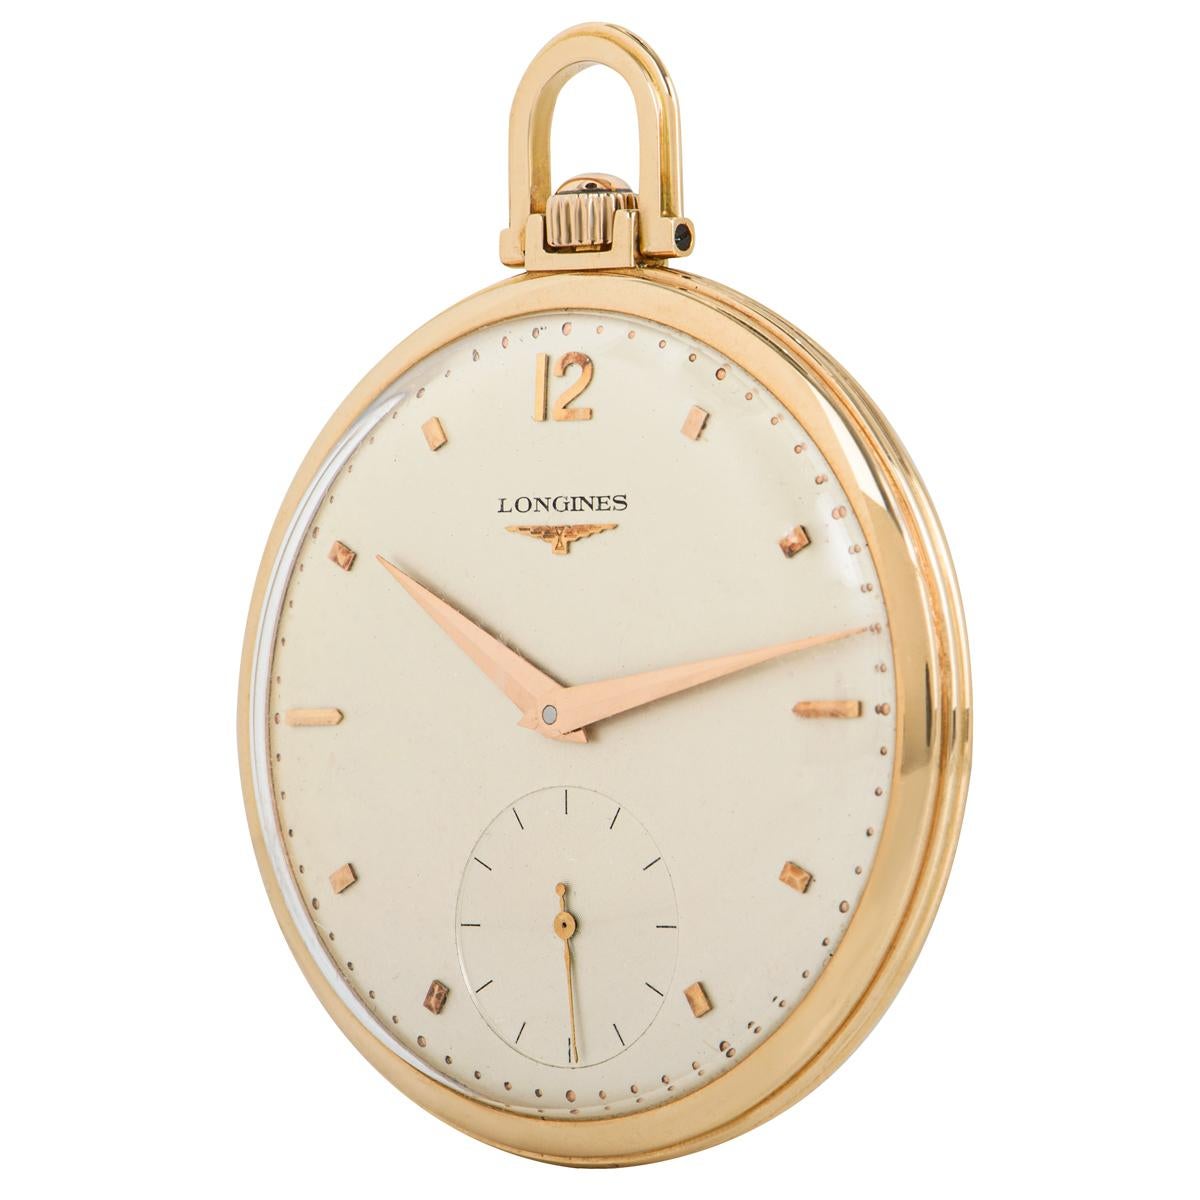 Longines 18ct Rose Gold Open Face Keyless Lever Gentleman's Dress Pocket Watch C1920.

Dial: The beautiful original silver dial fully signed Longines with rose gold markers, Arabic number twelve and original rose gold Dauphine hands.

Case: The very